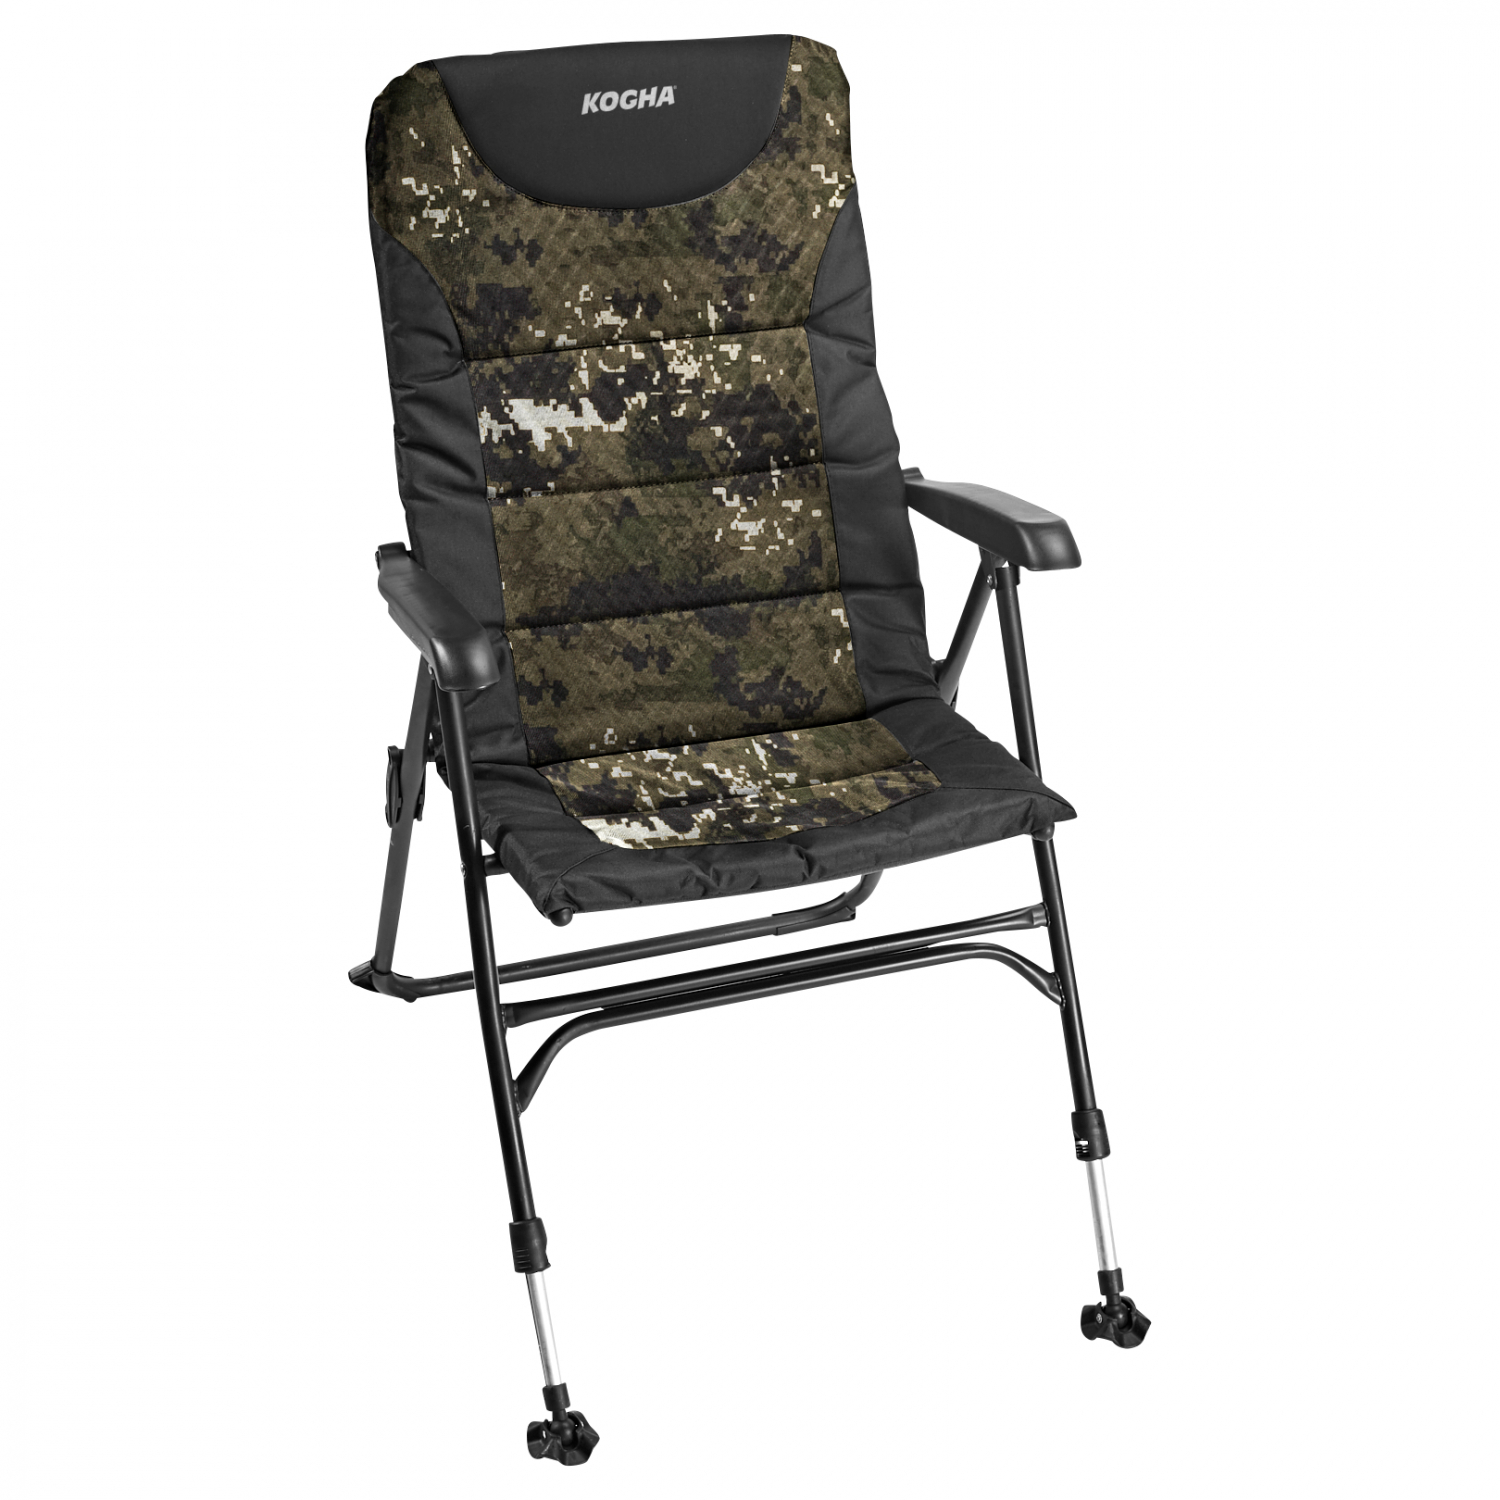 Kogha Fishing chair with backrest 